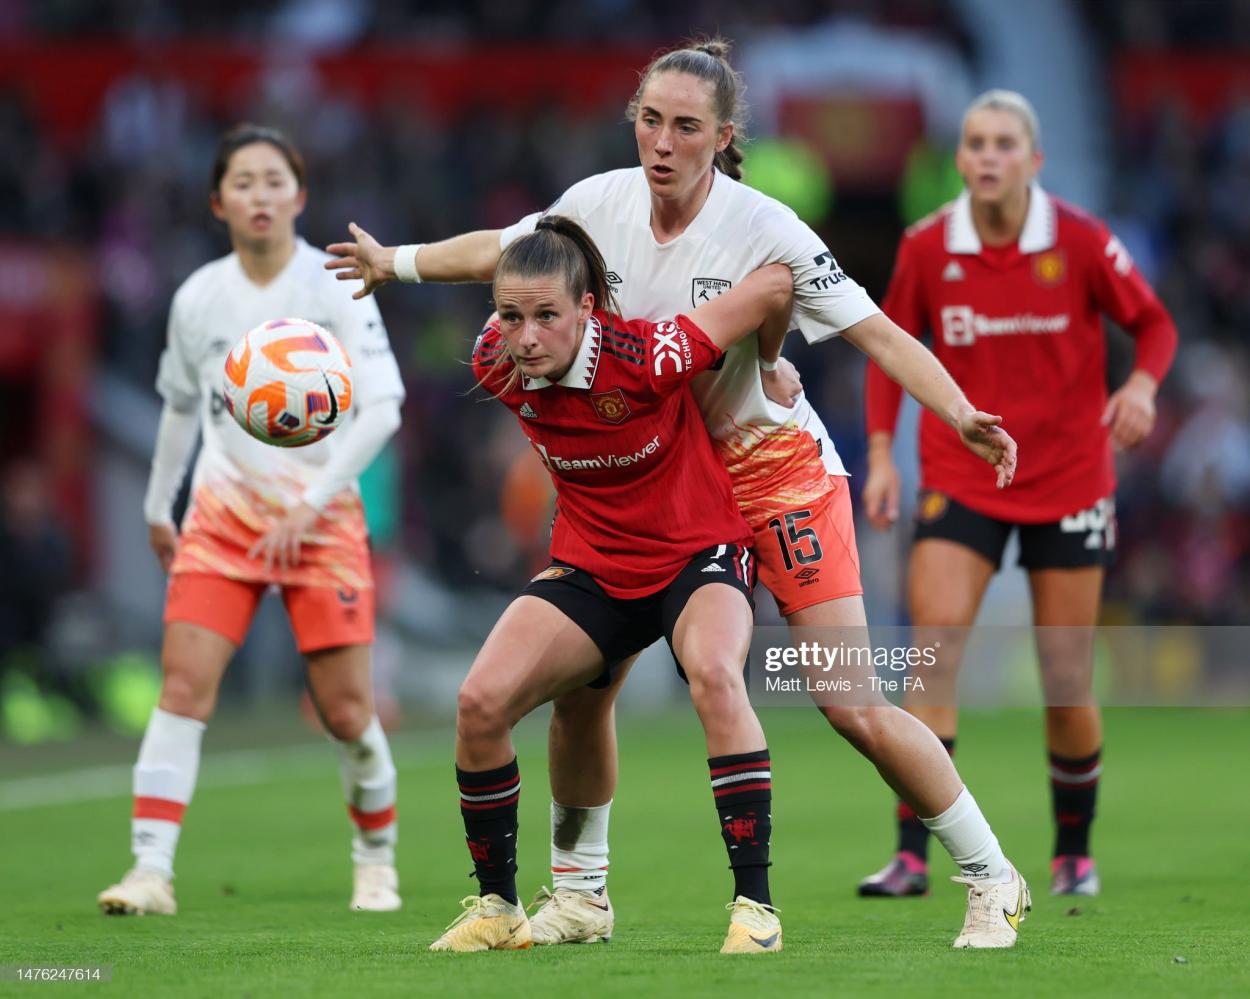 <strong><a  data-cke-saved-href='https://www.vavel.com/en/football/2023/03/11/womens-football/1140391-emma-hayes-will-have-them-fired-up-marc-skinner-previews-difficult-clash-against-chelsea.html' href='https://www.vavel.com/en/football/2023/03/11/womens-football/1140391-emma-hayes-will-have-them-fired-up-marc-skinner-previews-difficult-clash-against-chelsea.html'>Ella Toone</a></strong> of Manchester United holds off Lucy Parker of West Ham United during the FA Women's Super League match between Manchester United and West Ham United at Old Trafford on March 25, 2023 in Manchester, England. (Photo by Matt Lewis - The FA/The FA via Getty Images)